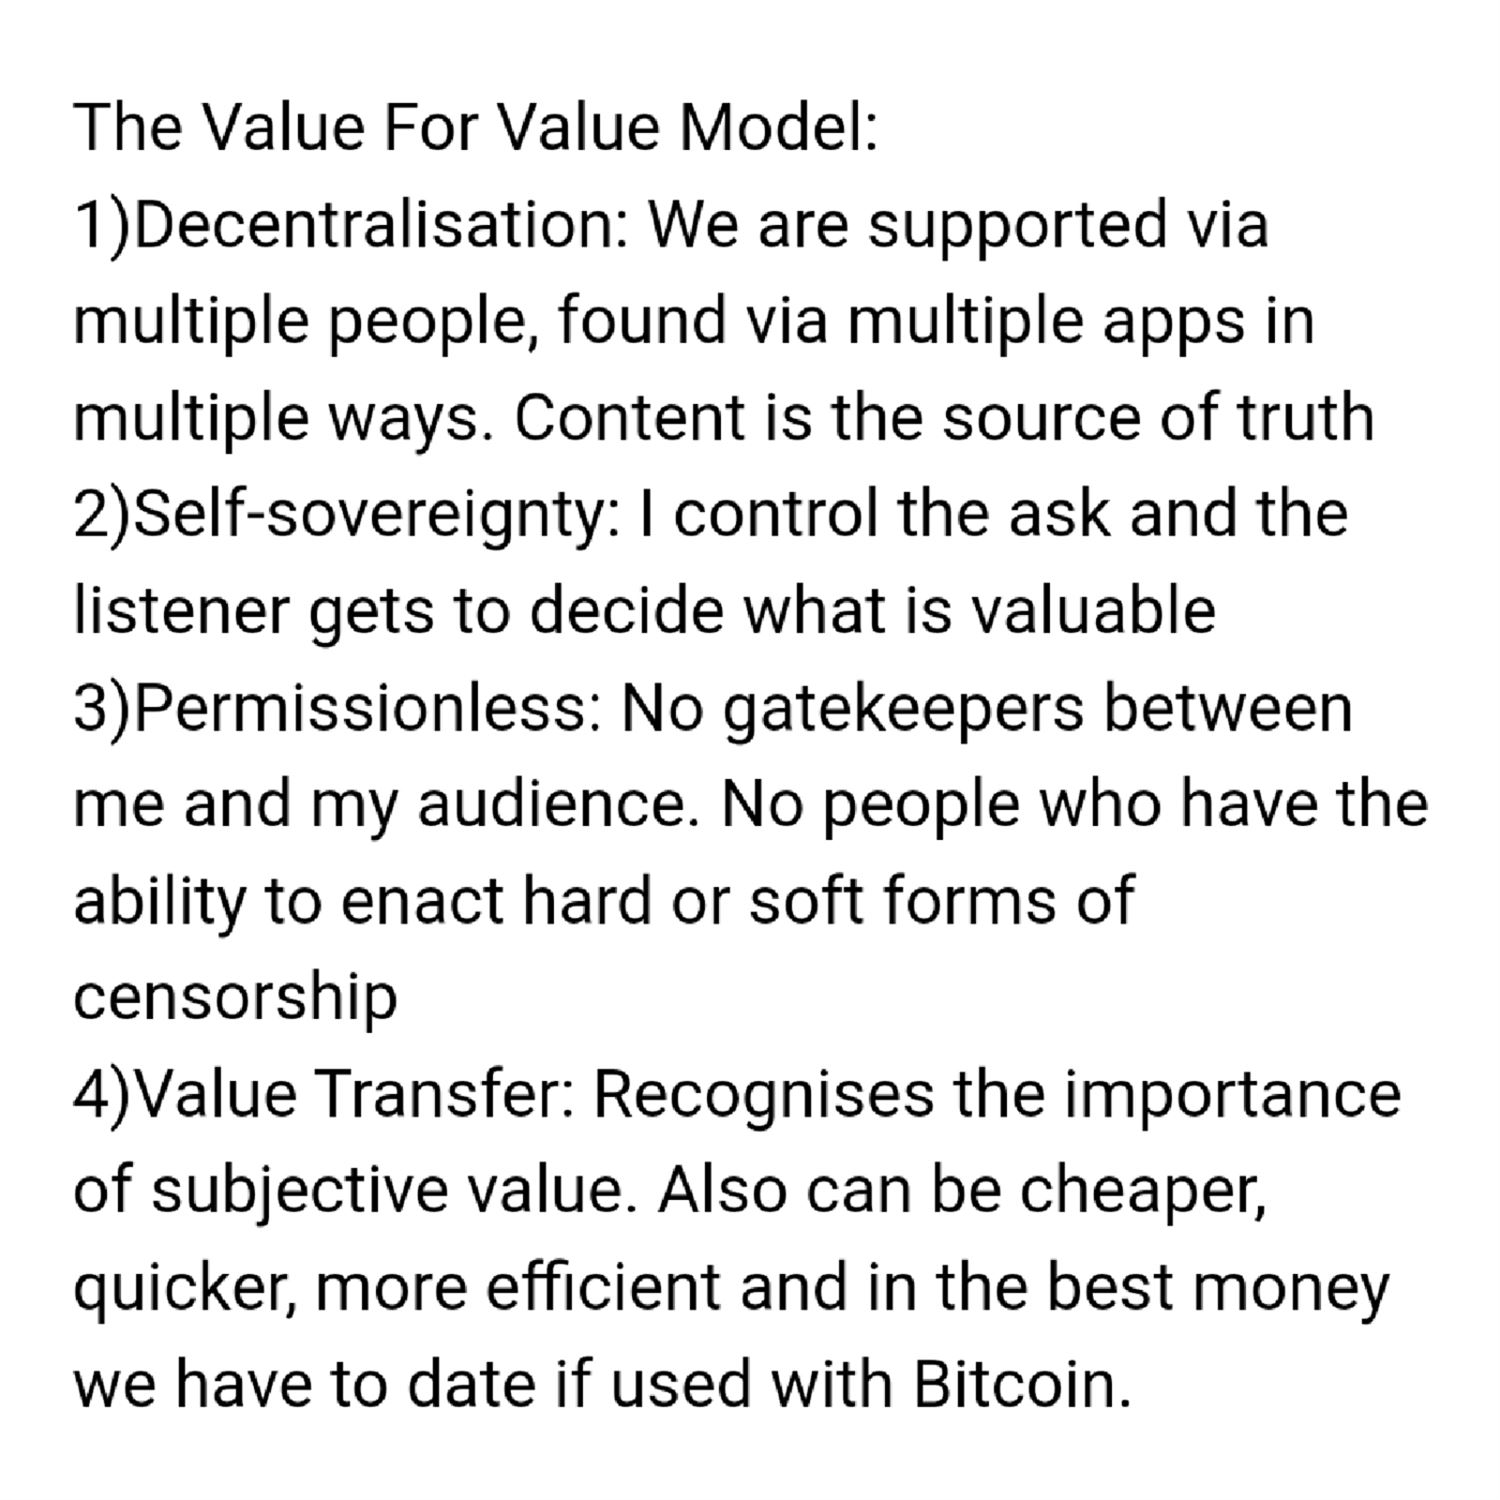 The Value For Value Model